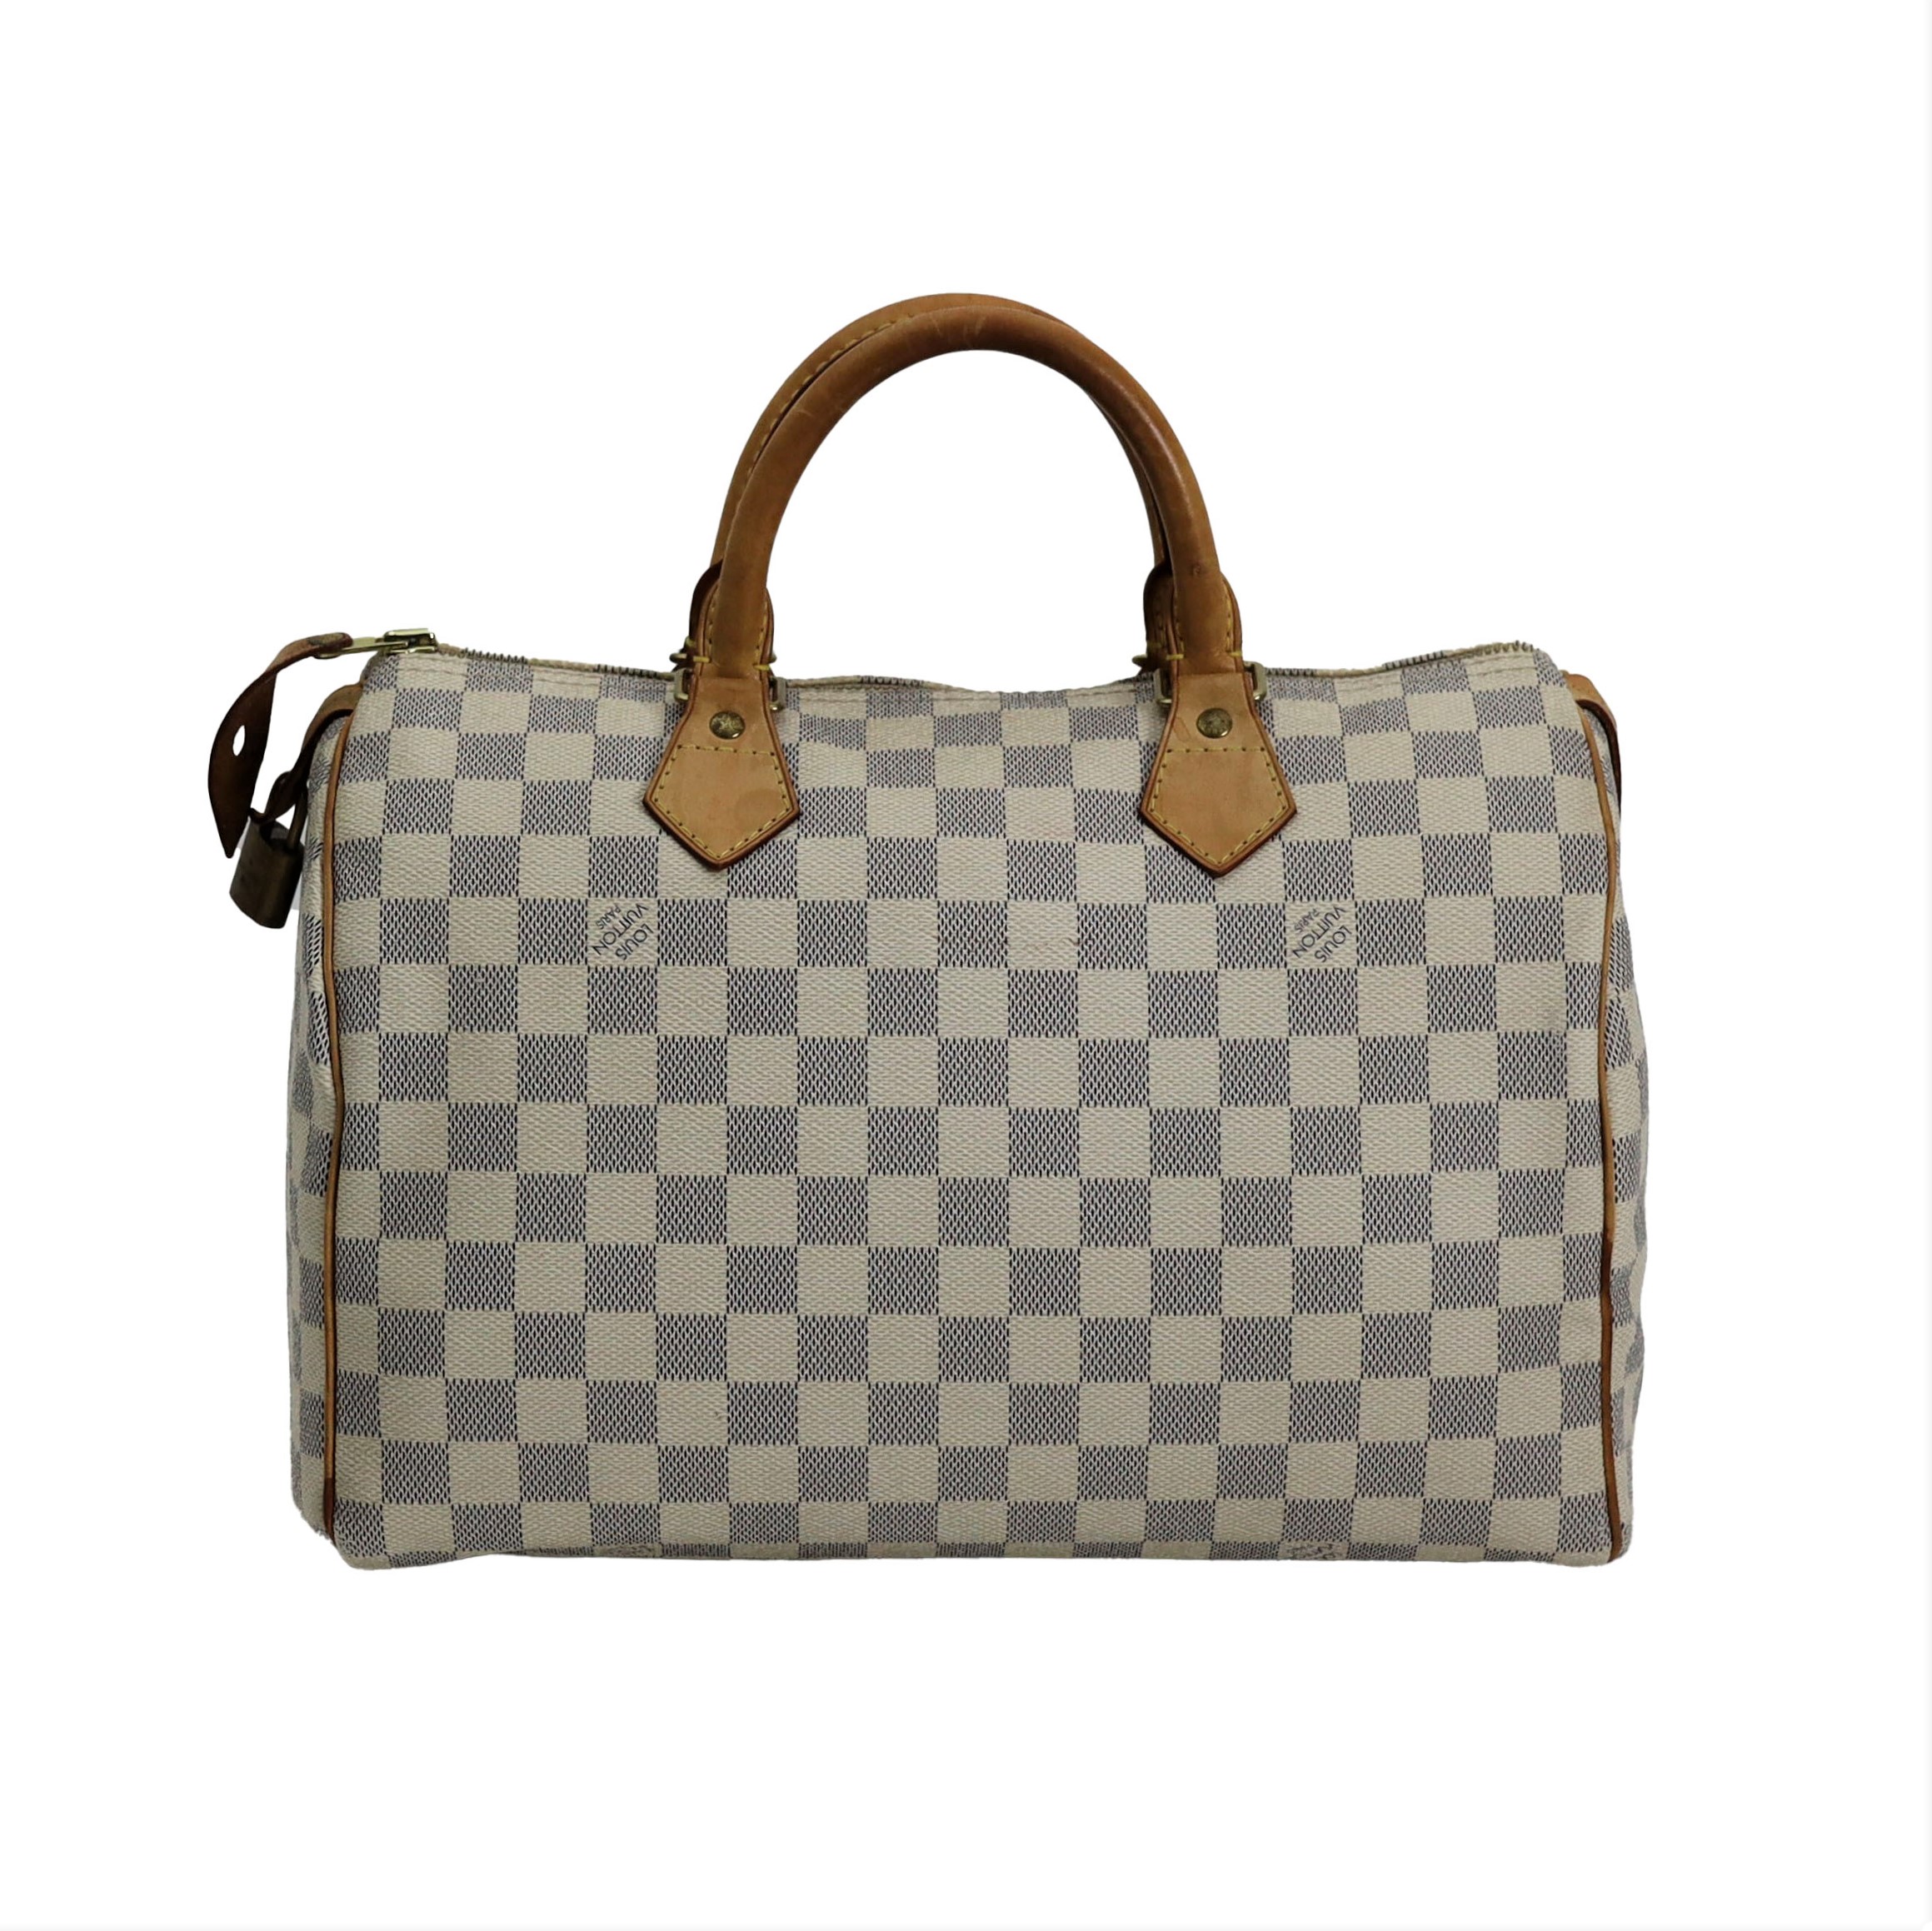 Belastingen Tol thermometer Louis Vuitton Speedy 30 - The A-Collection